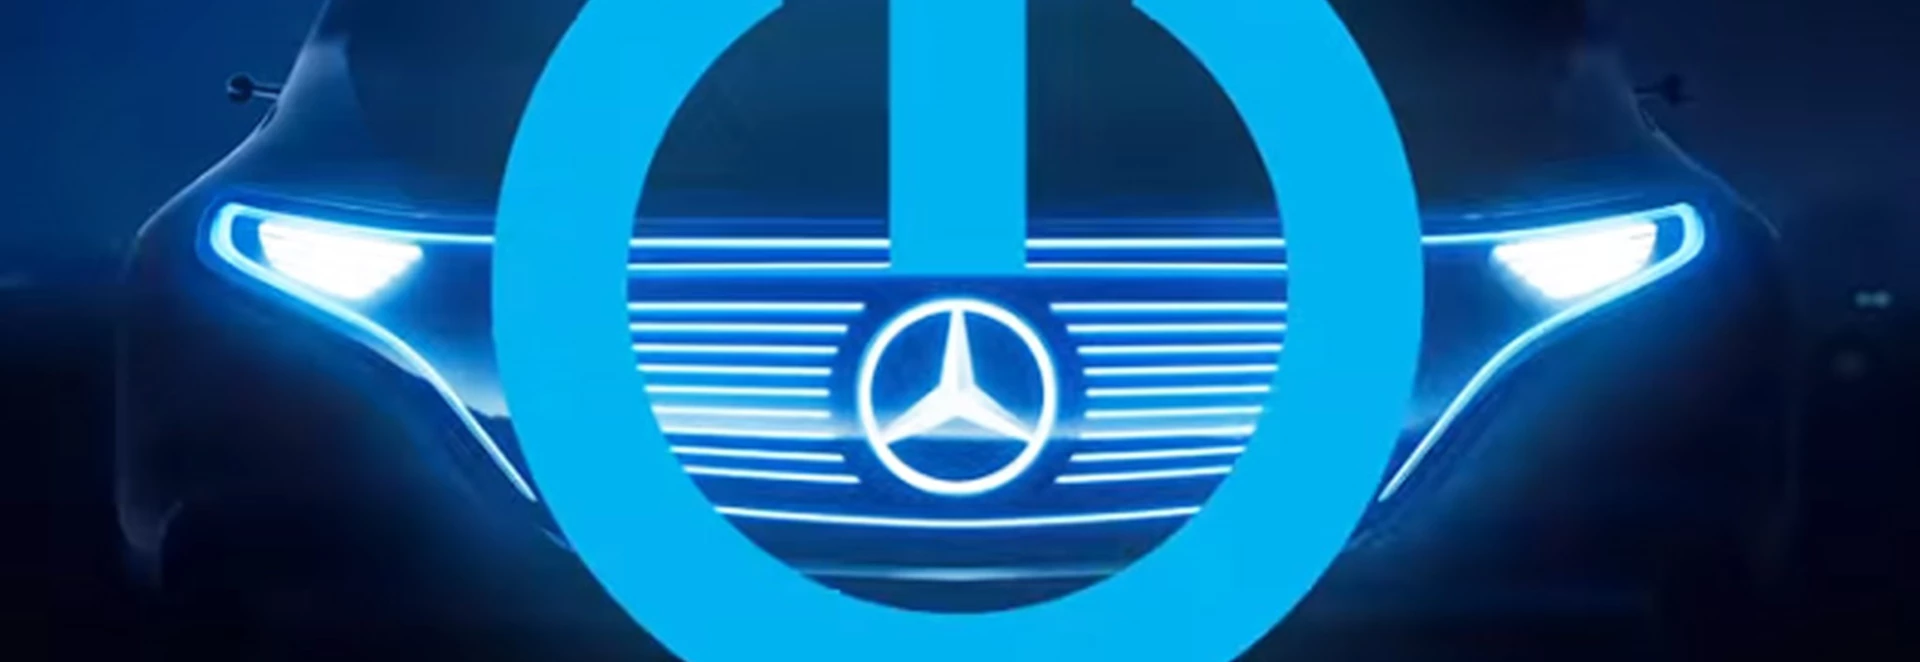 Mercedes-Benz reveals electric car concept in new teaser video 